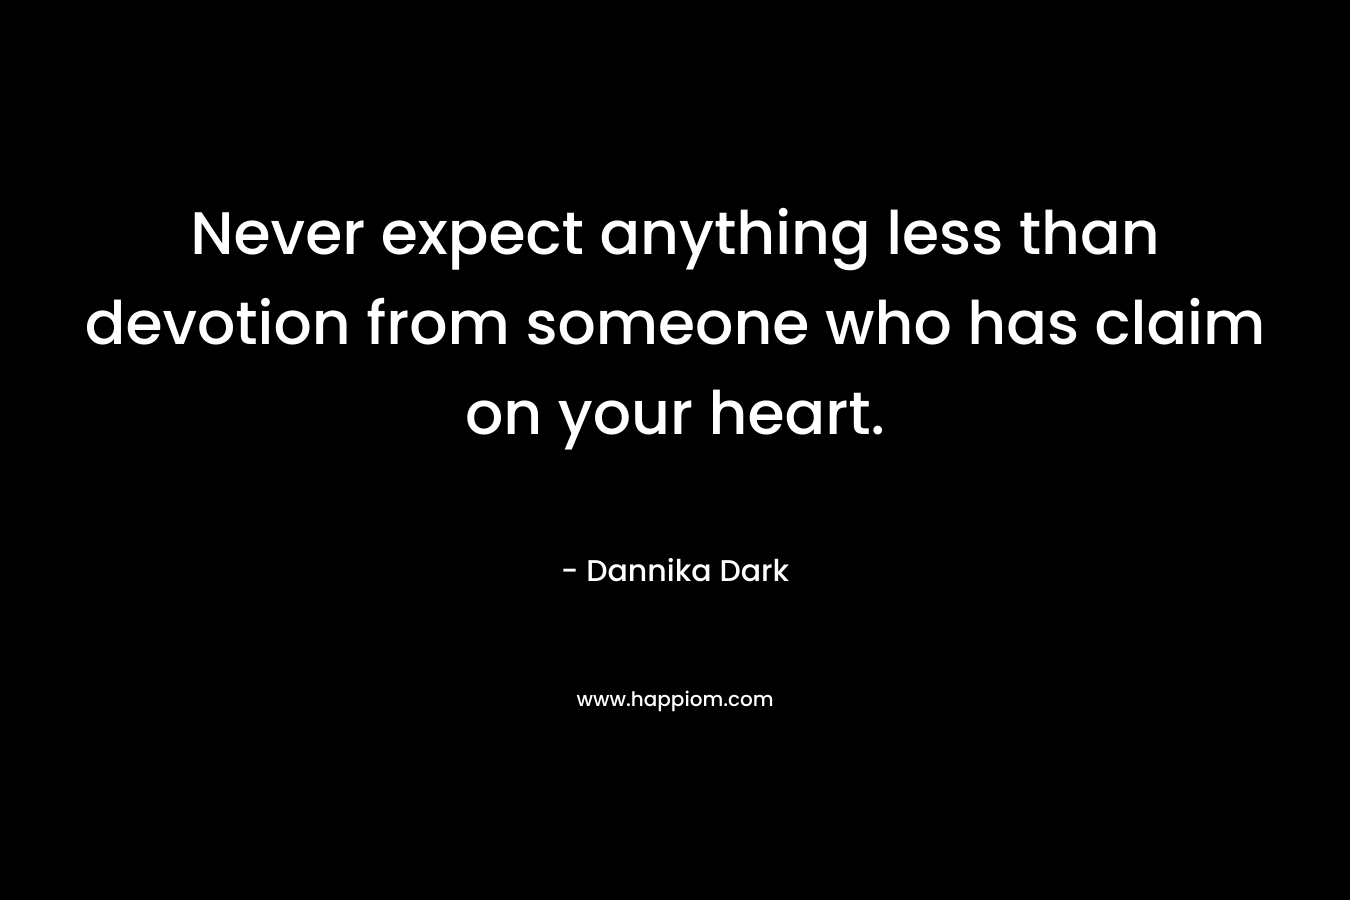 Never expect anything less than devotion from someone who has claim on your heart.